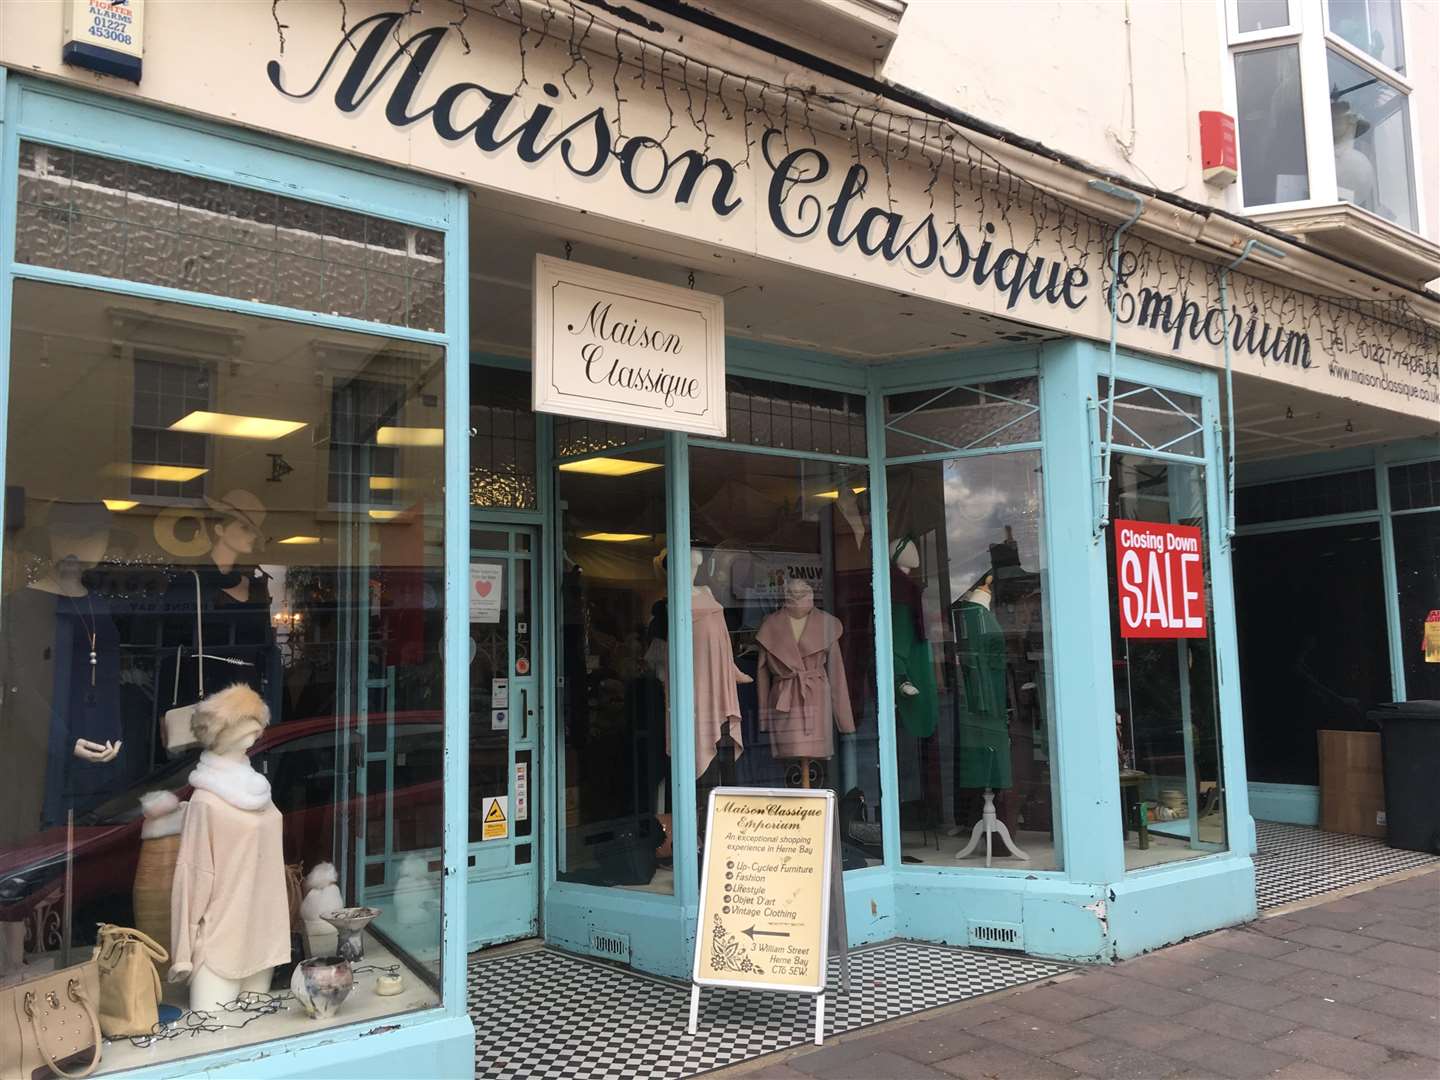 Maison Classique Emporium in William Street will be closing before the end of the year (5510028)